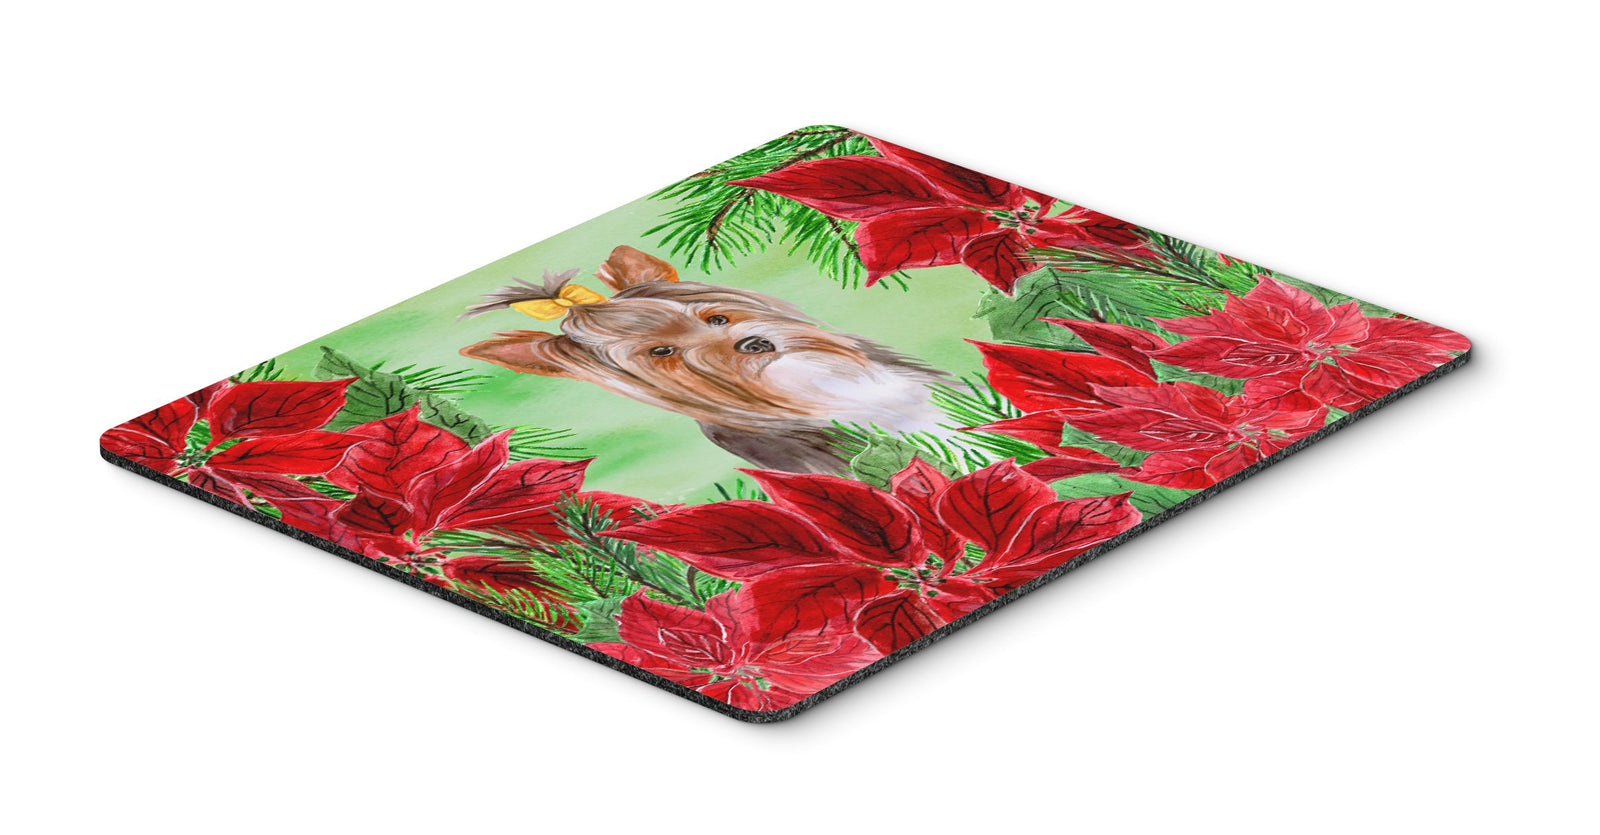 Yorkshire Terrier #2 Poinsettas Mouse Pad, Hot Pad or Trivet CK1370MP by Caroline's Treasures